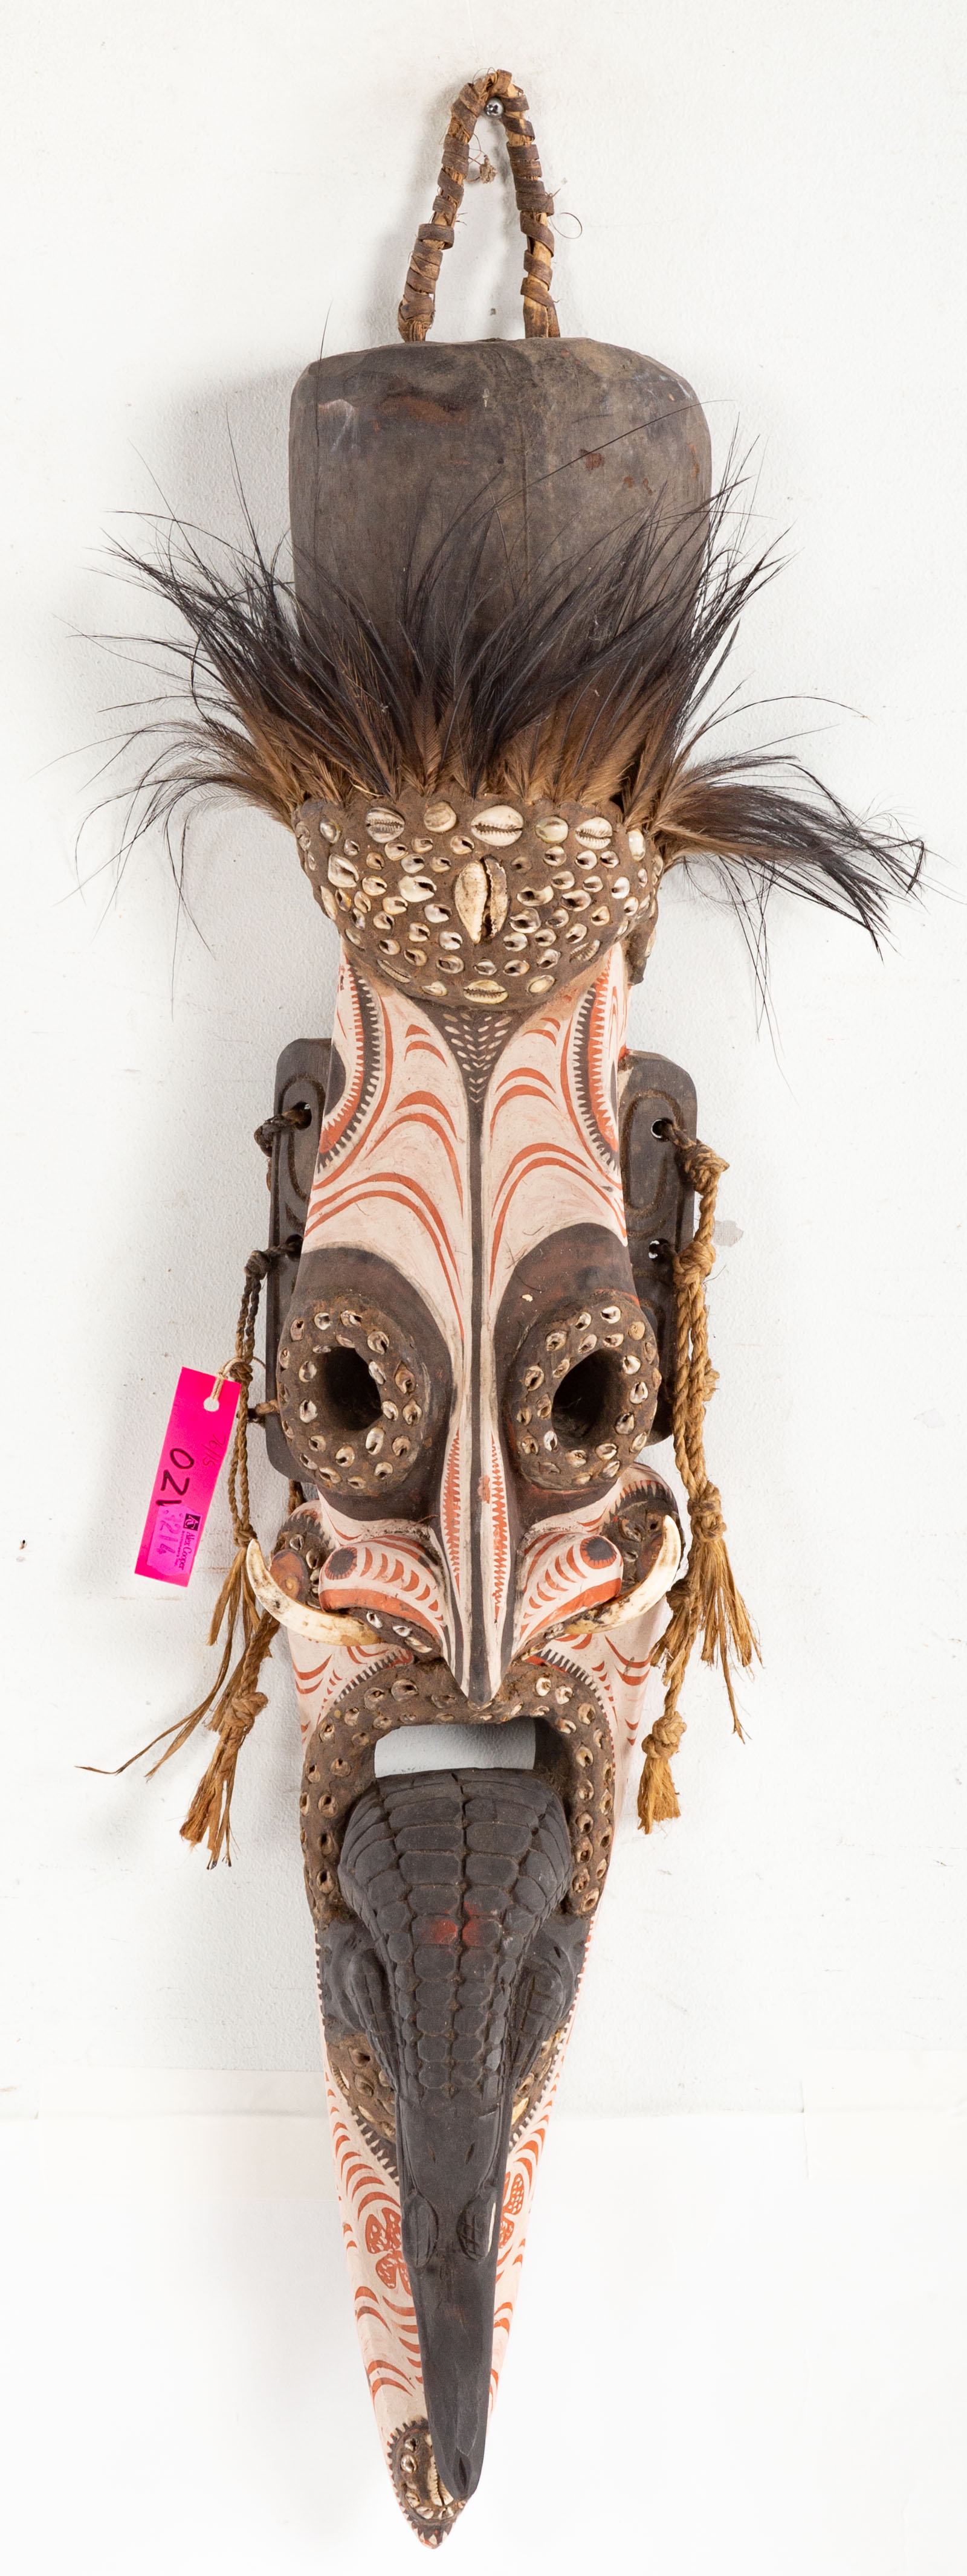 NEW GUINEA CARVED MASK Carved and 2e959f